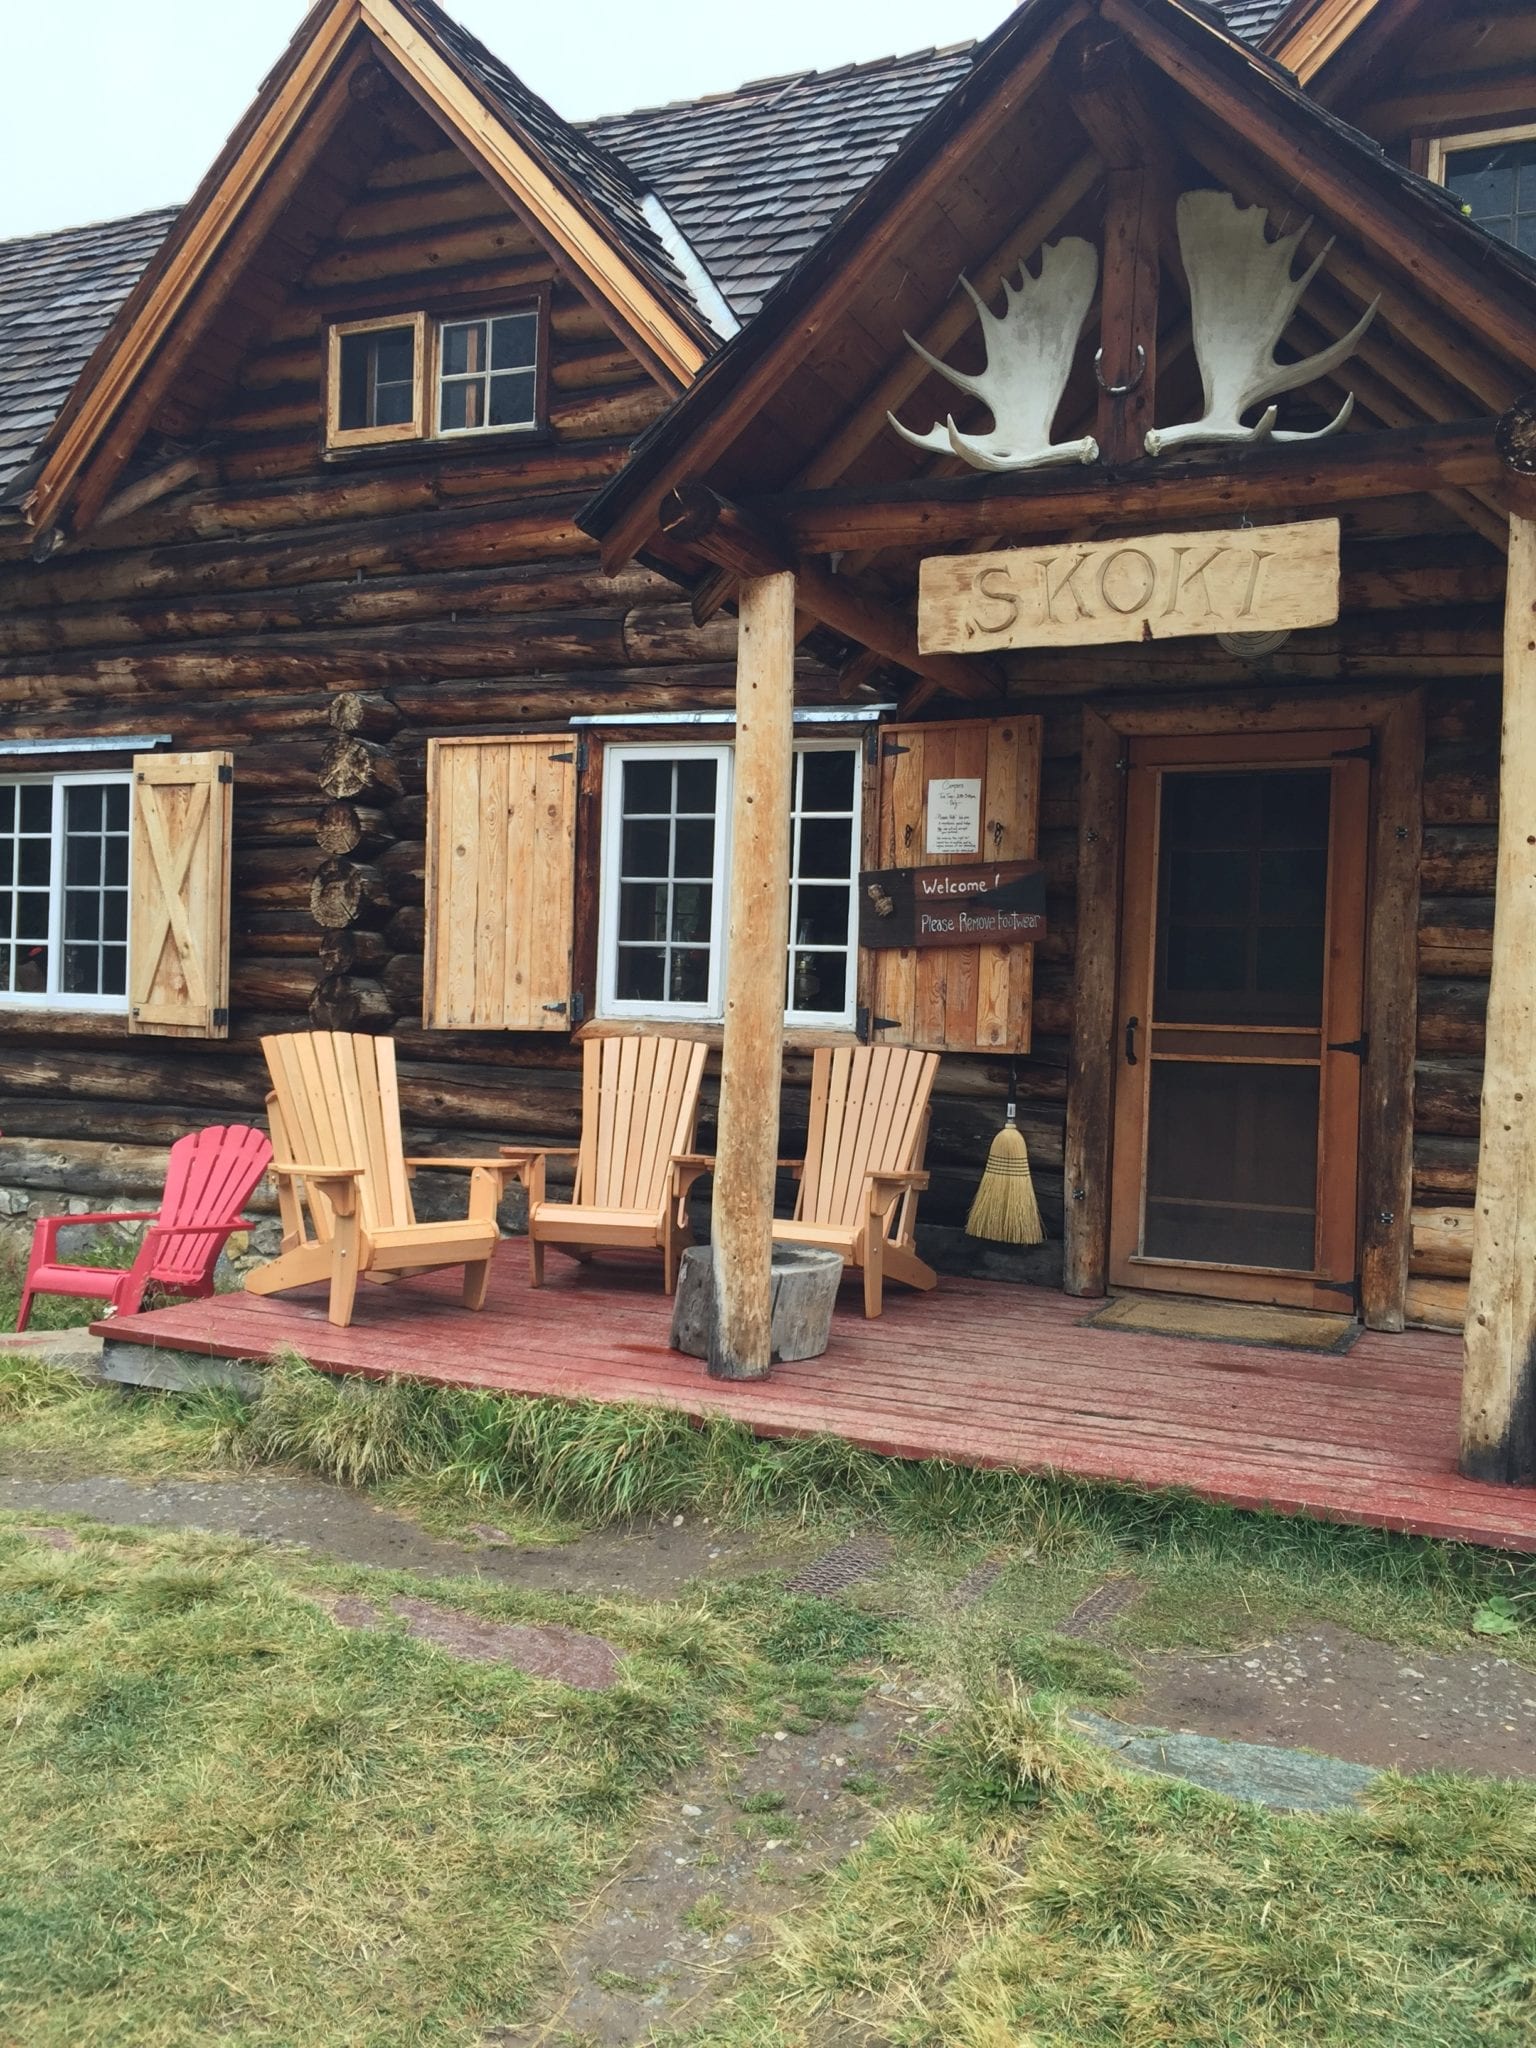 Skoki Lodge is a hike-in only destination lodge located in Banff National Park. 